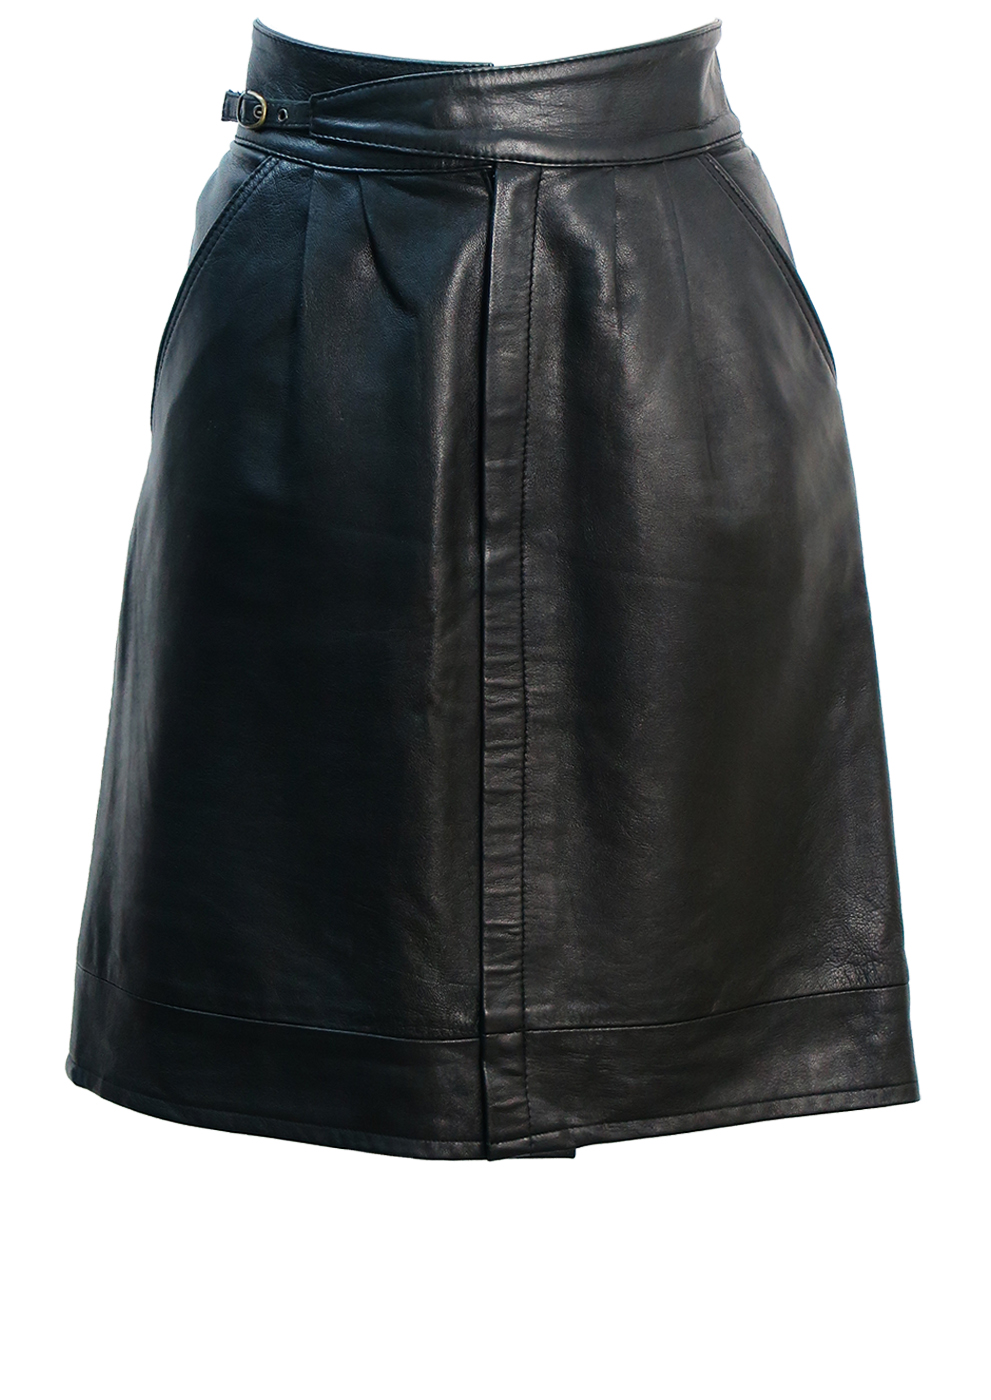 Black Leather Above the Knee Skirt with Cross Over Belt Detail - M ...